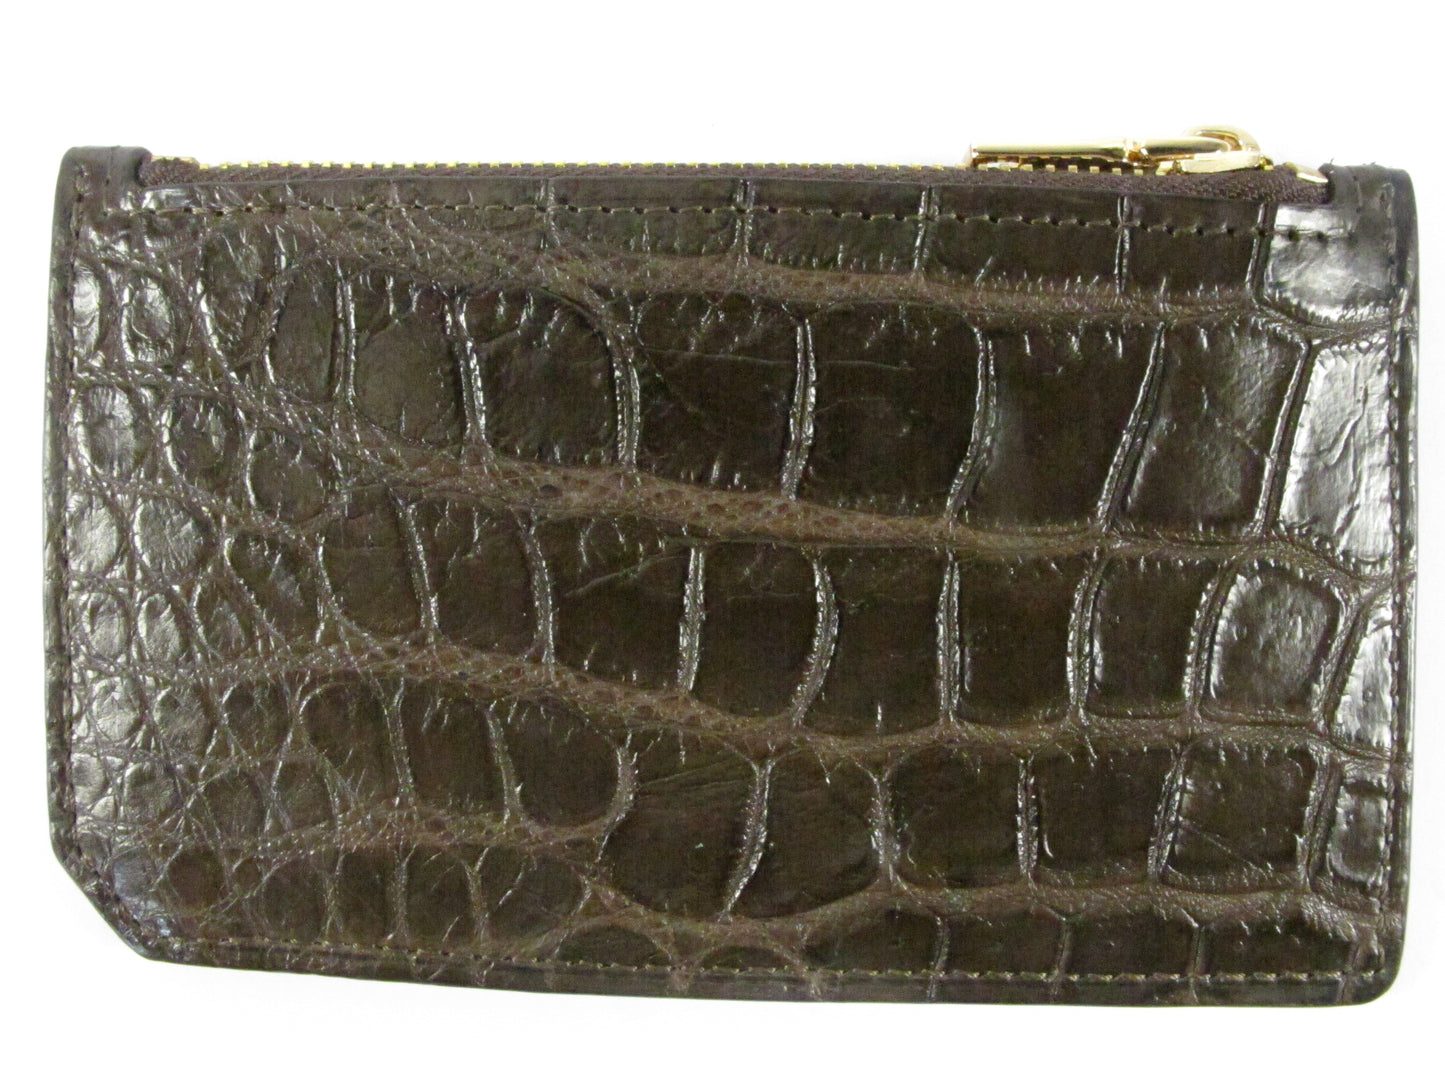 Genuine Crocodile Belly Skin Leather Business & Credit Card Holder Zip Wallet Coins Purse